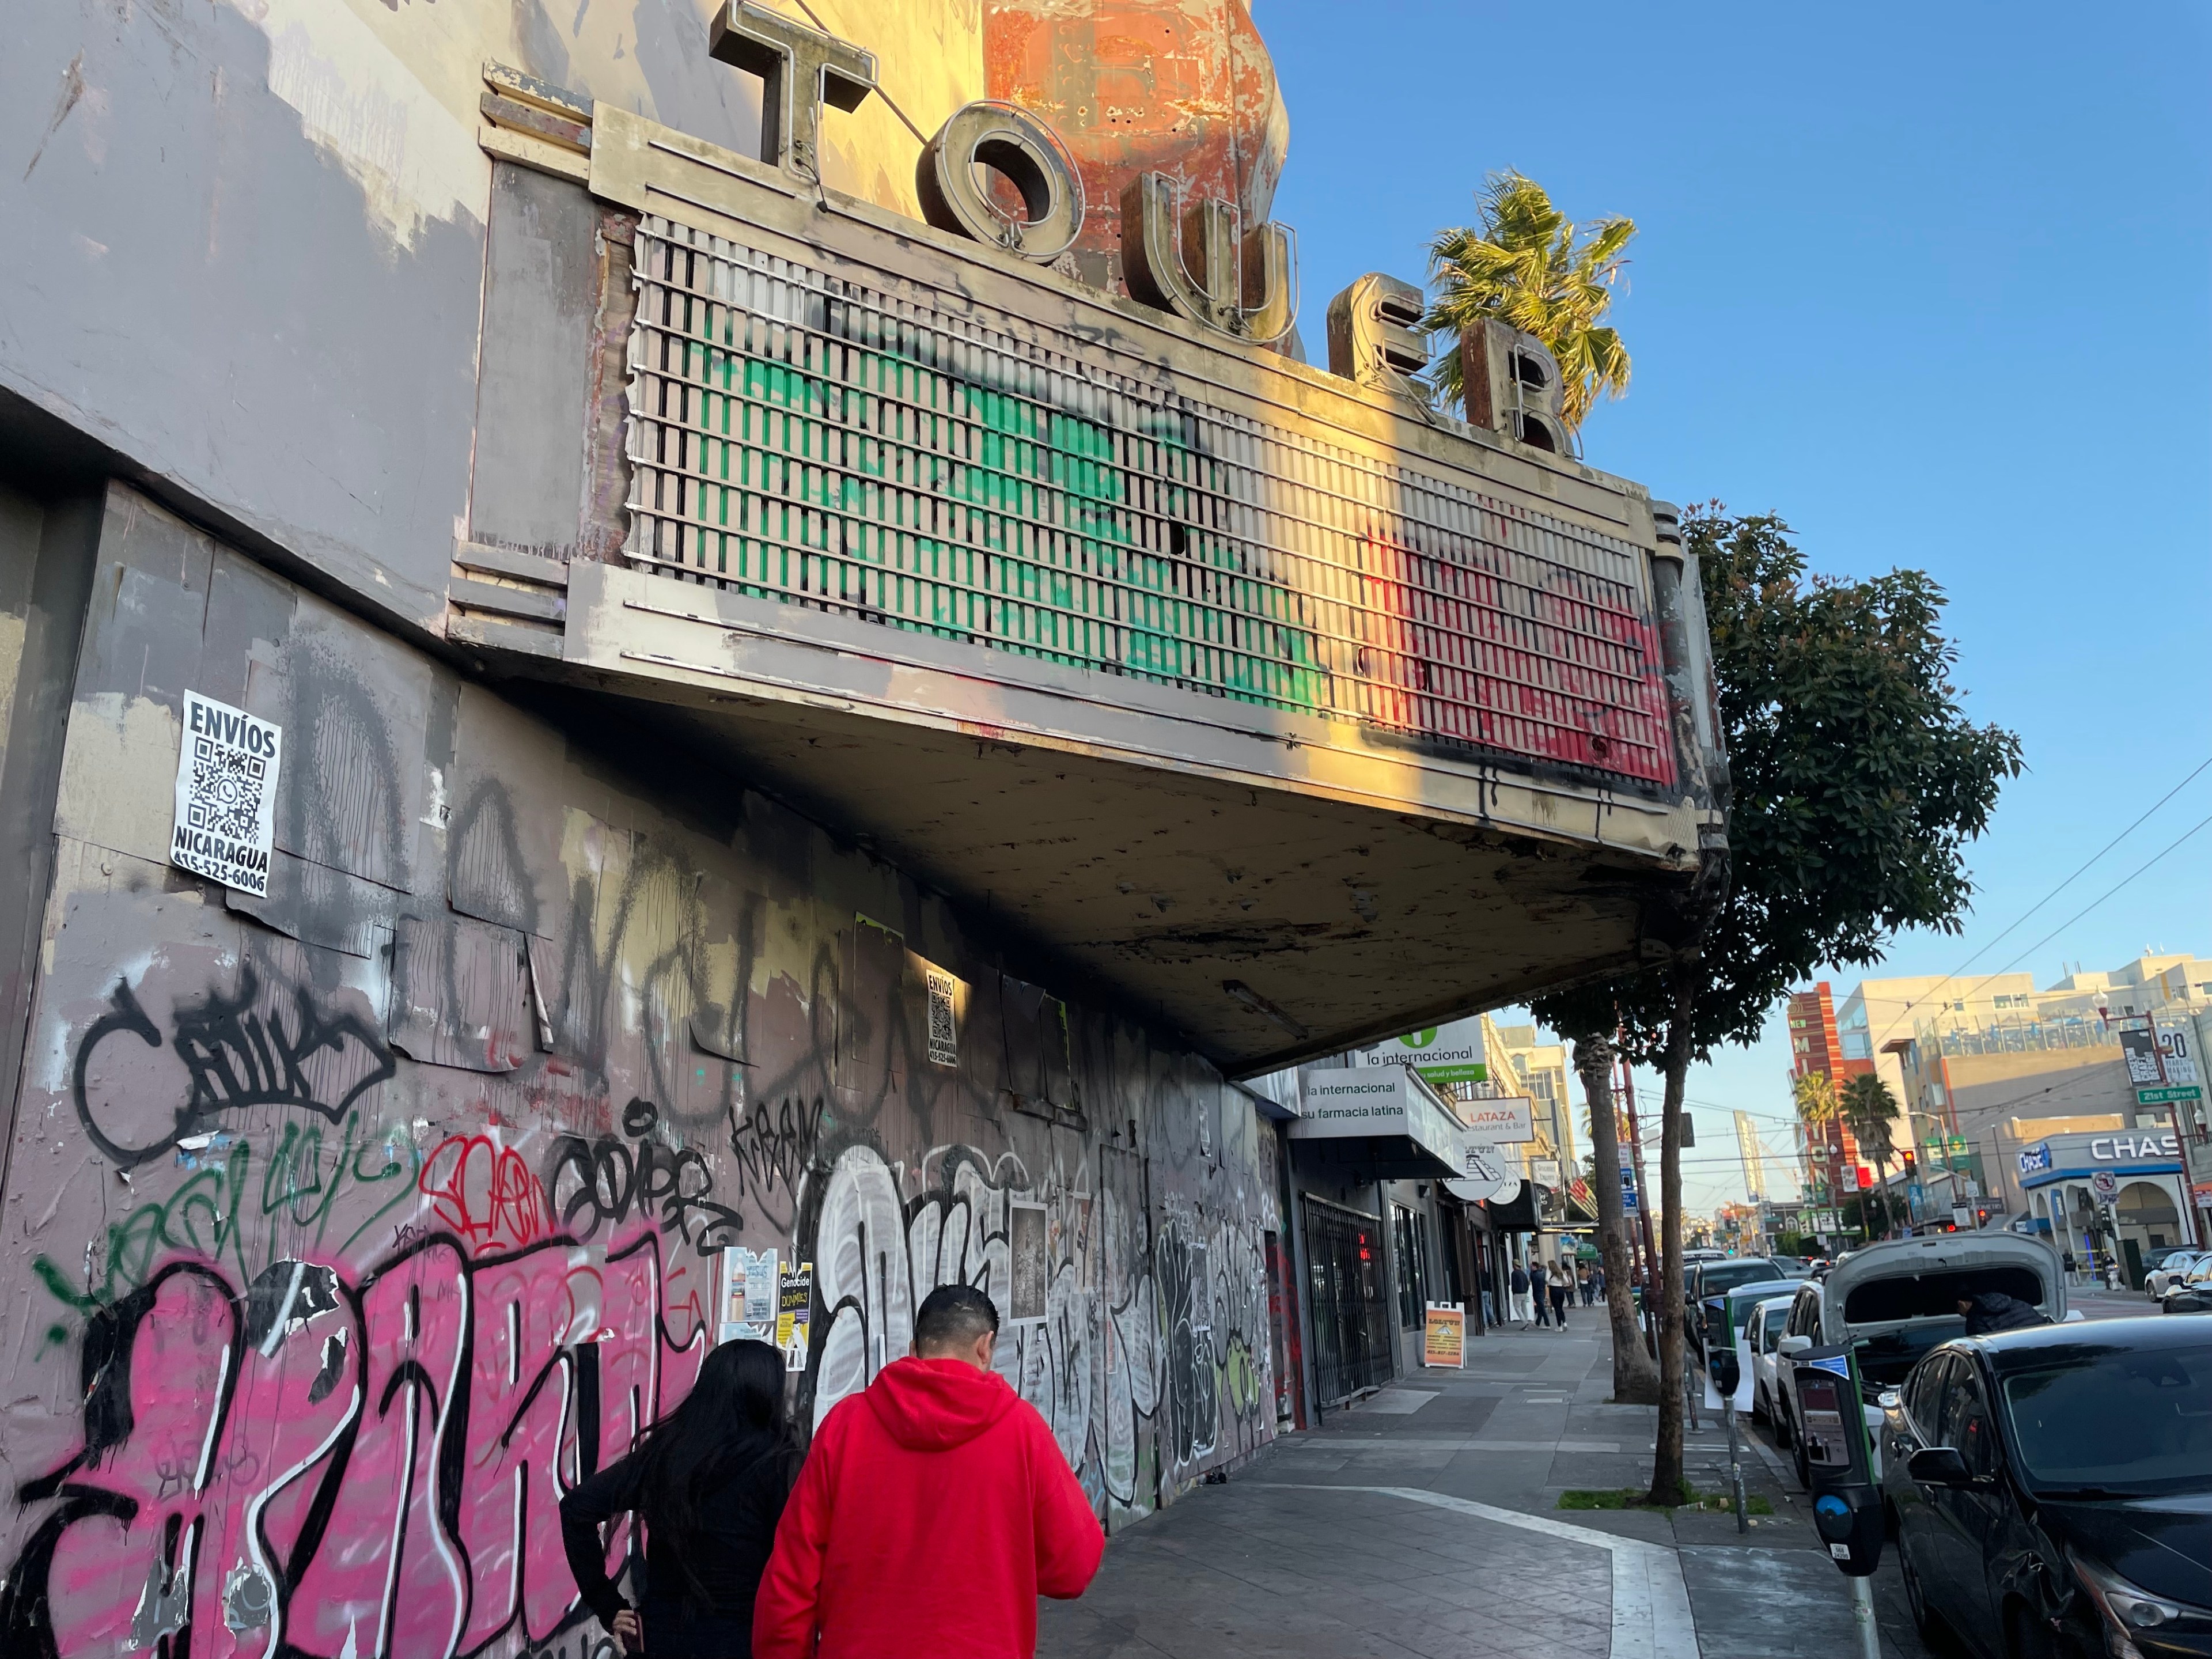 People walk in front of a ruined movie theater.